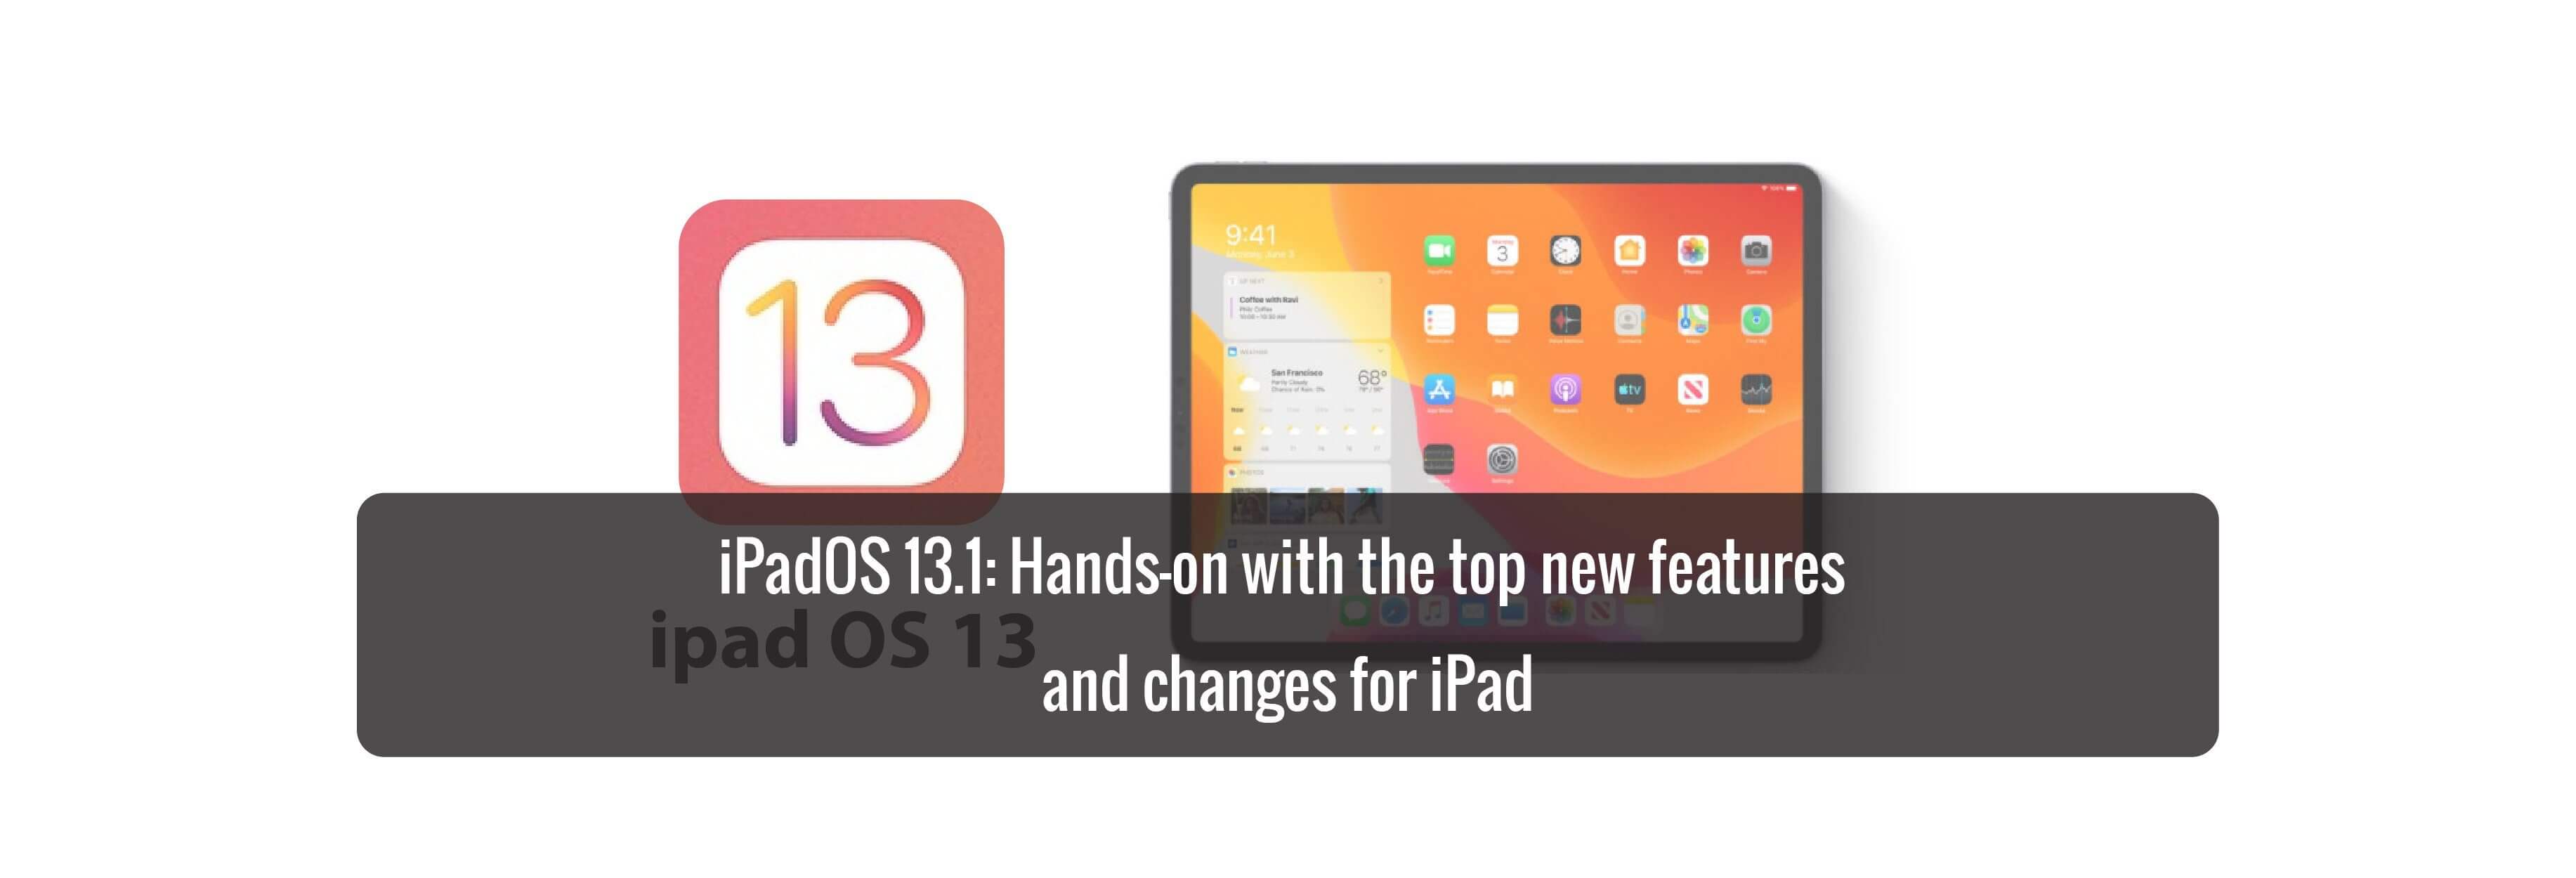 iPadOS 13.1: New features and changes for iPad